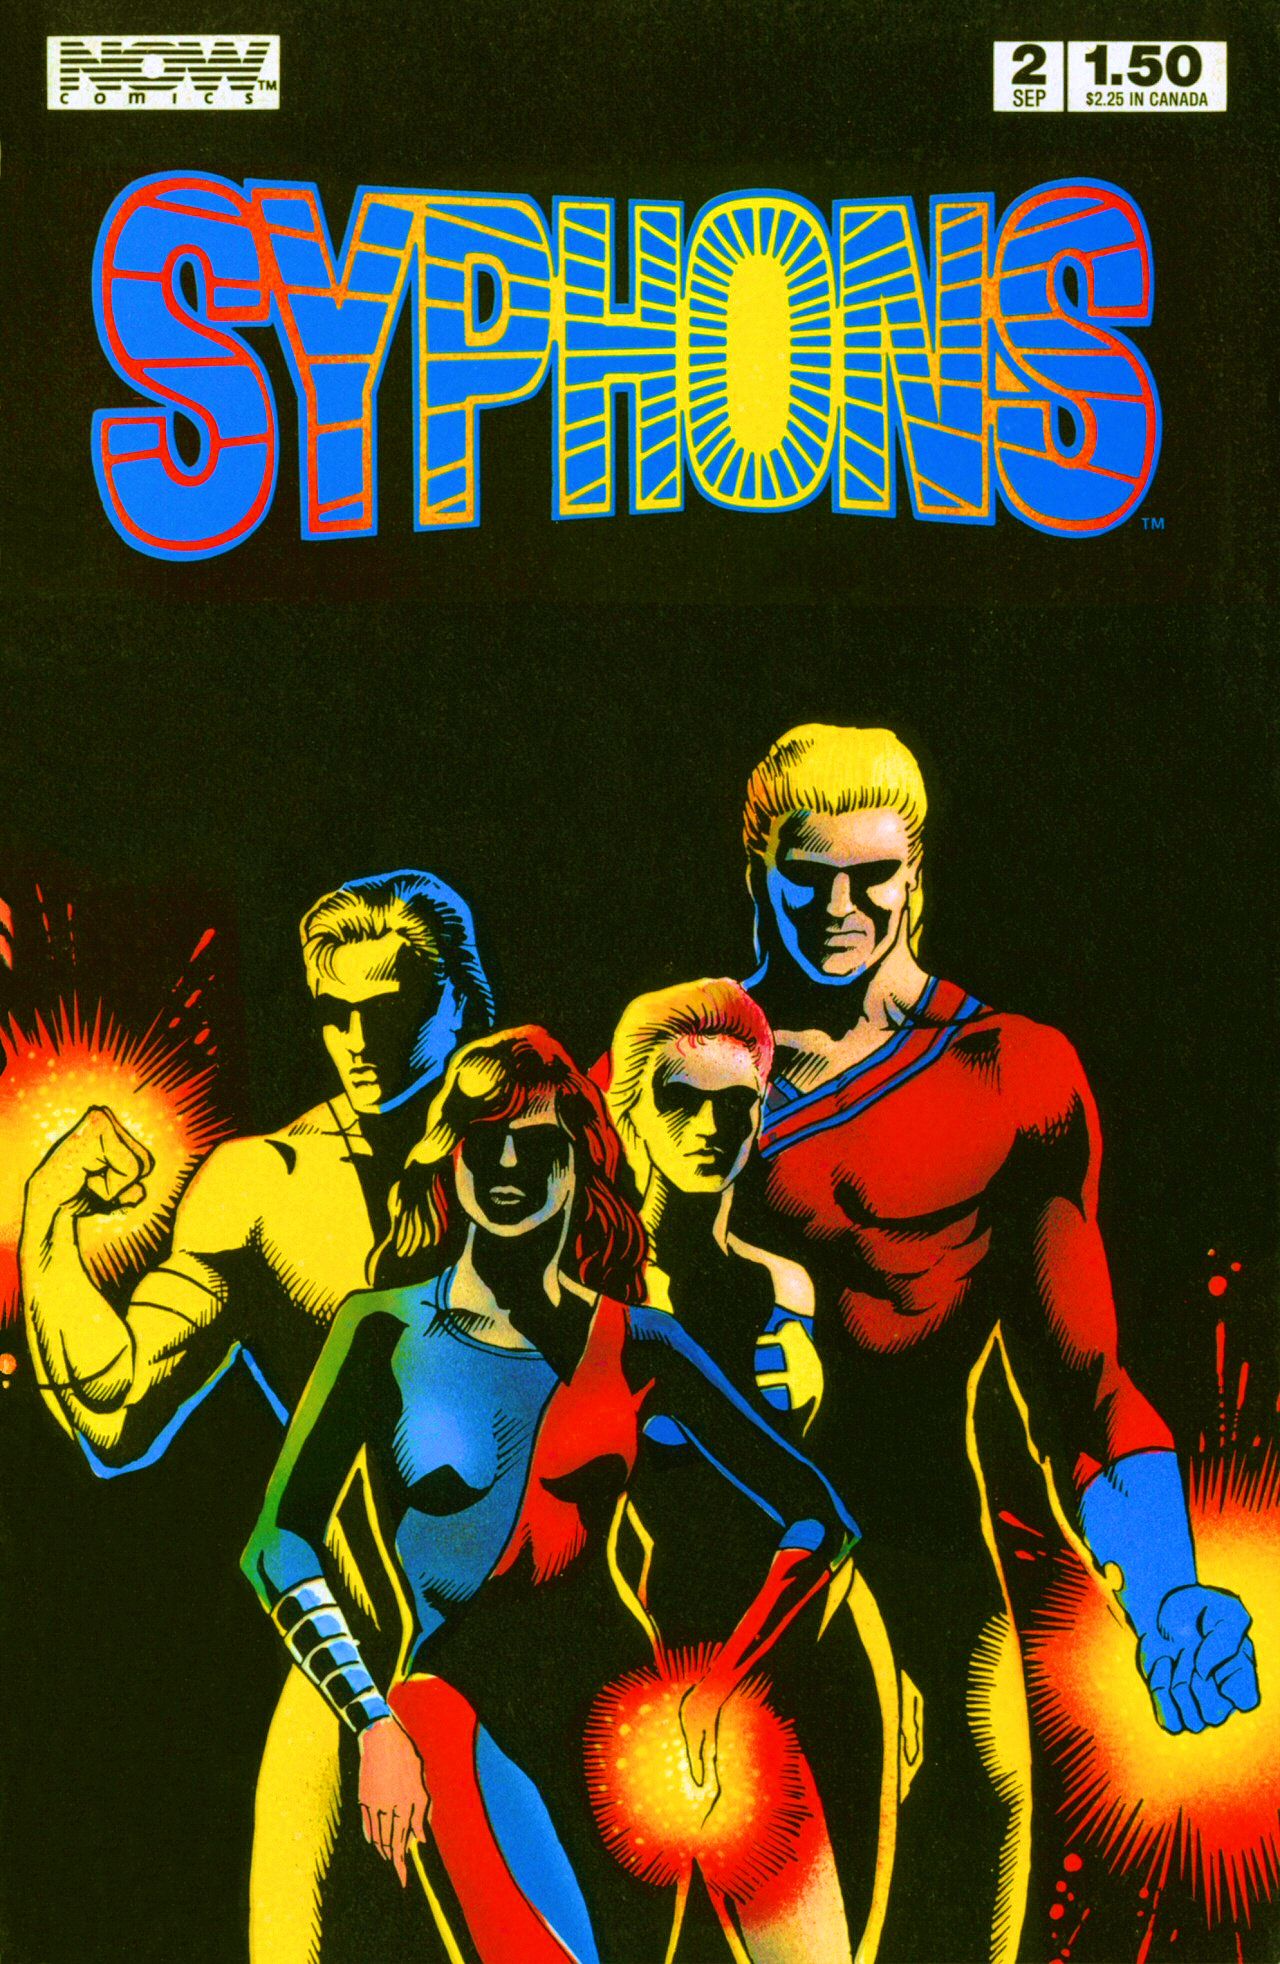 Read online Syphons comic -  Issue #2 - 1